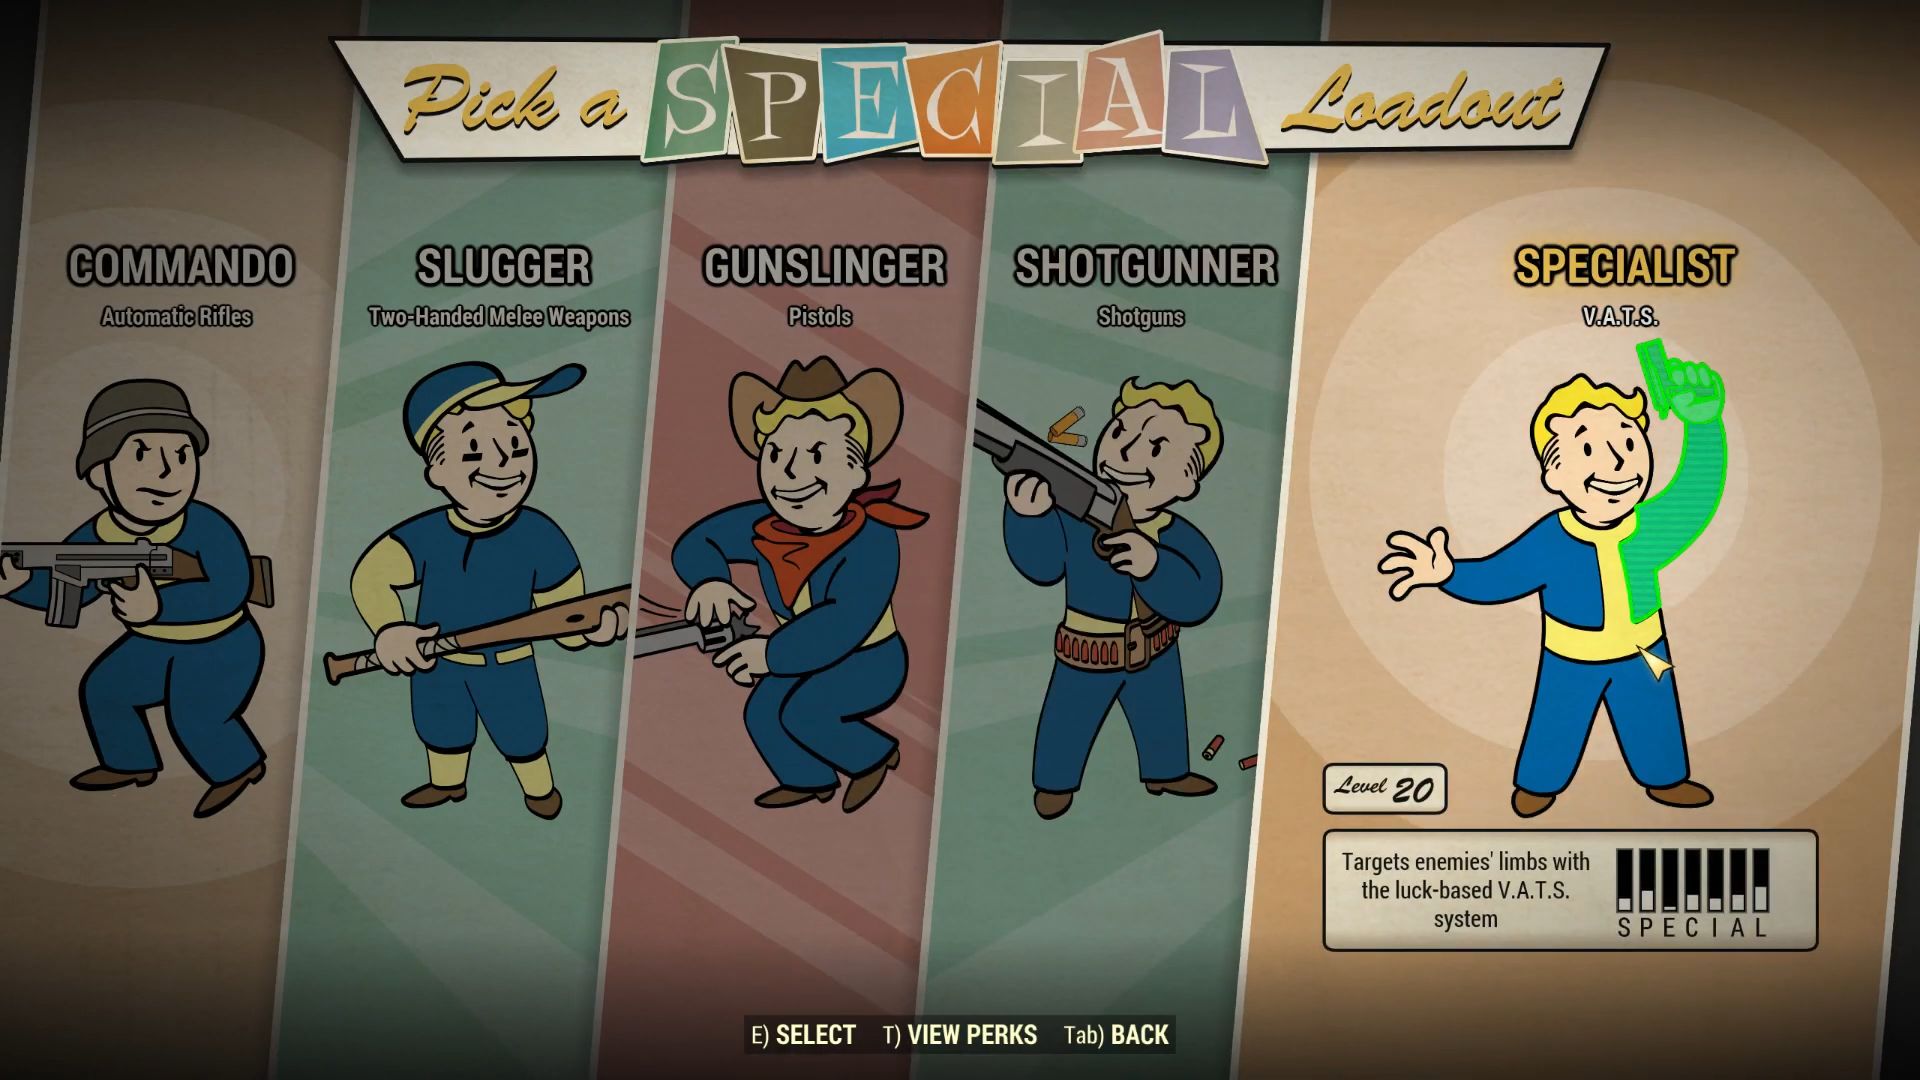 The Specialist loadout in Fallout 76